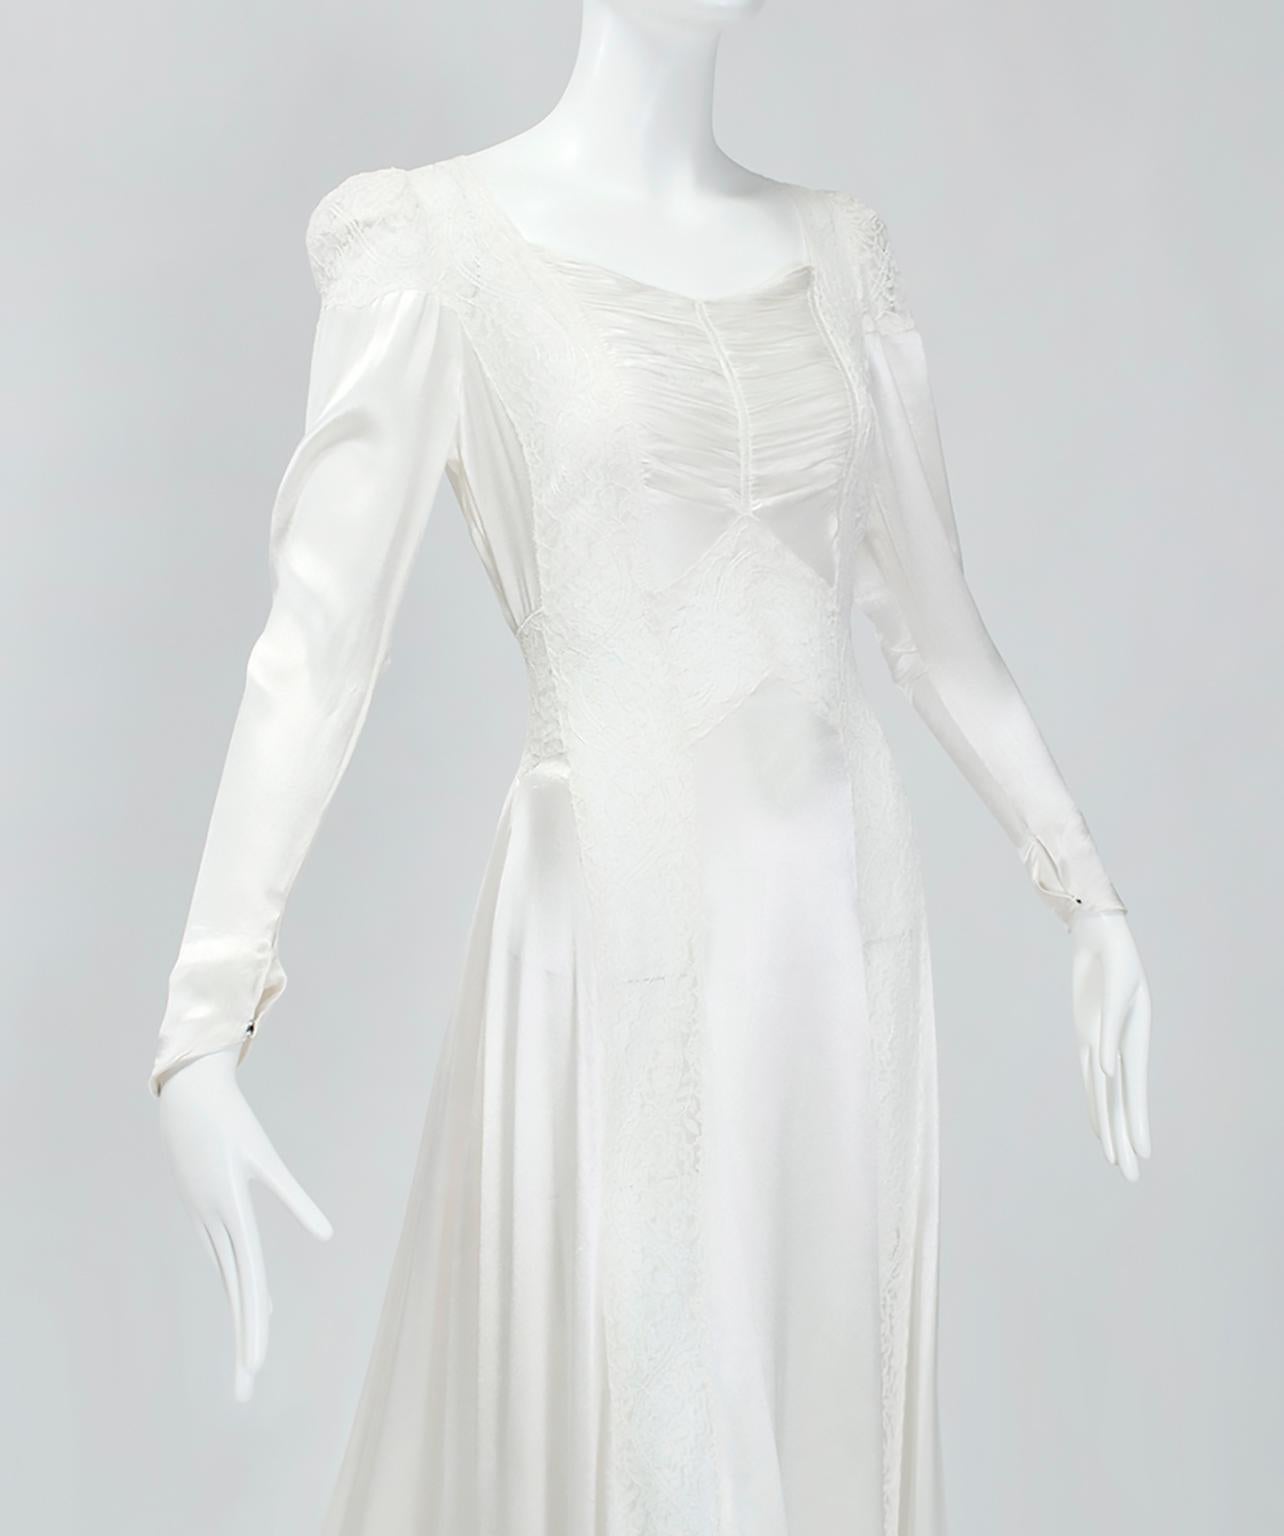 Women's Nearly Naked White Satin Deco Wedding Gown w Transparent Lace Panels - XS, 1930s For Sale